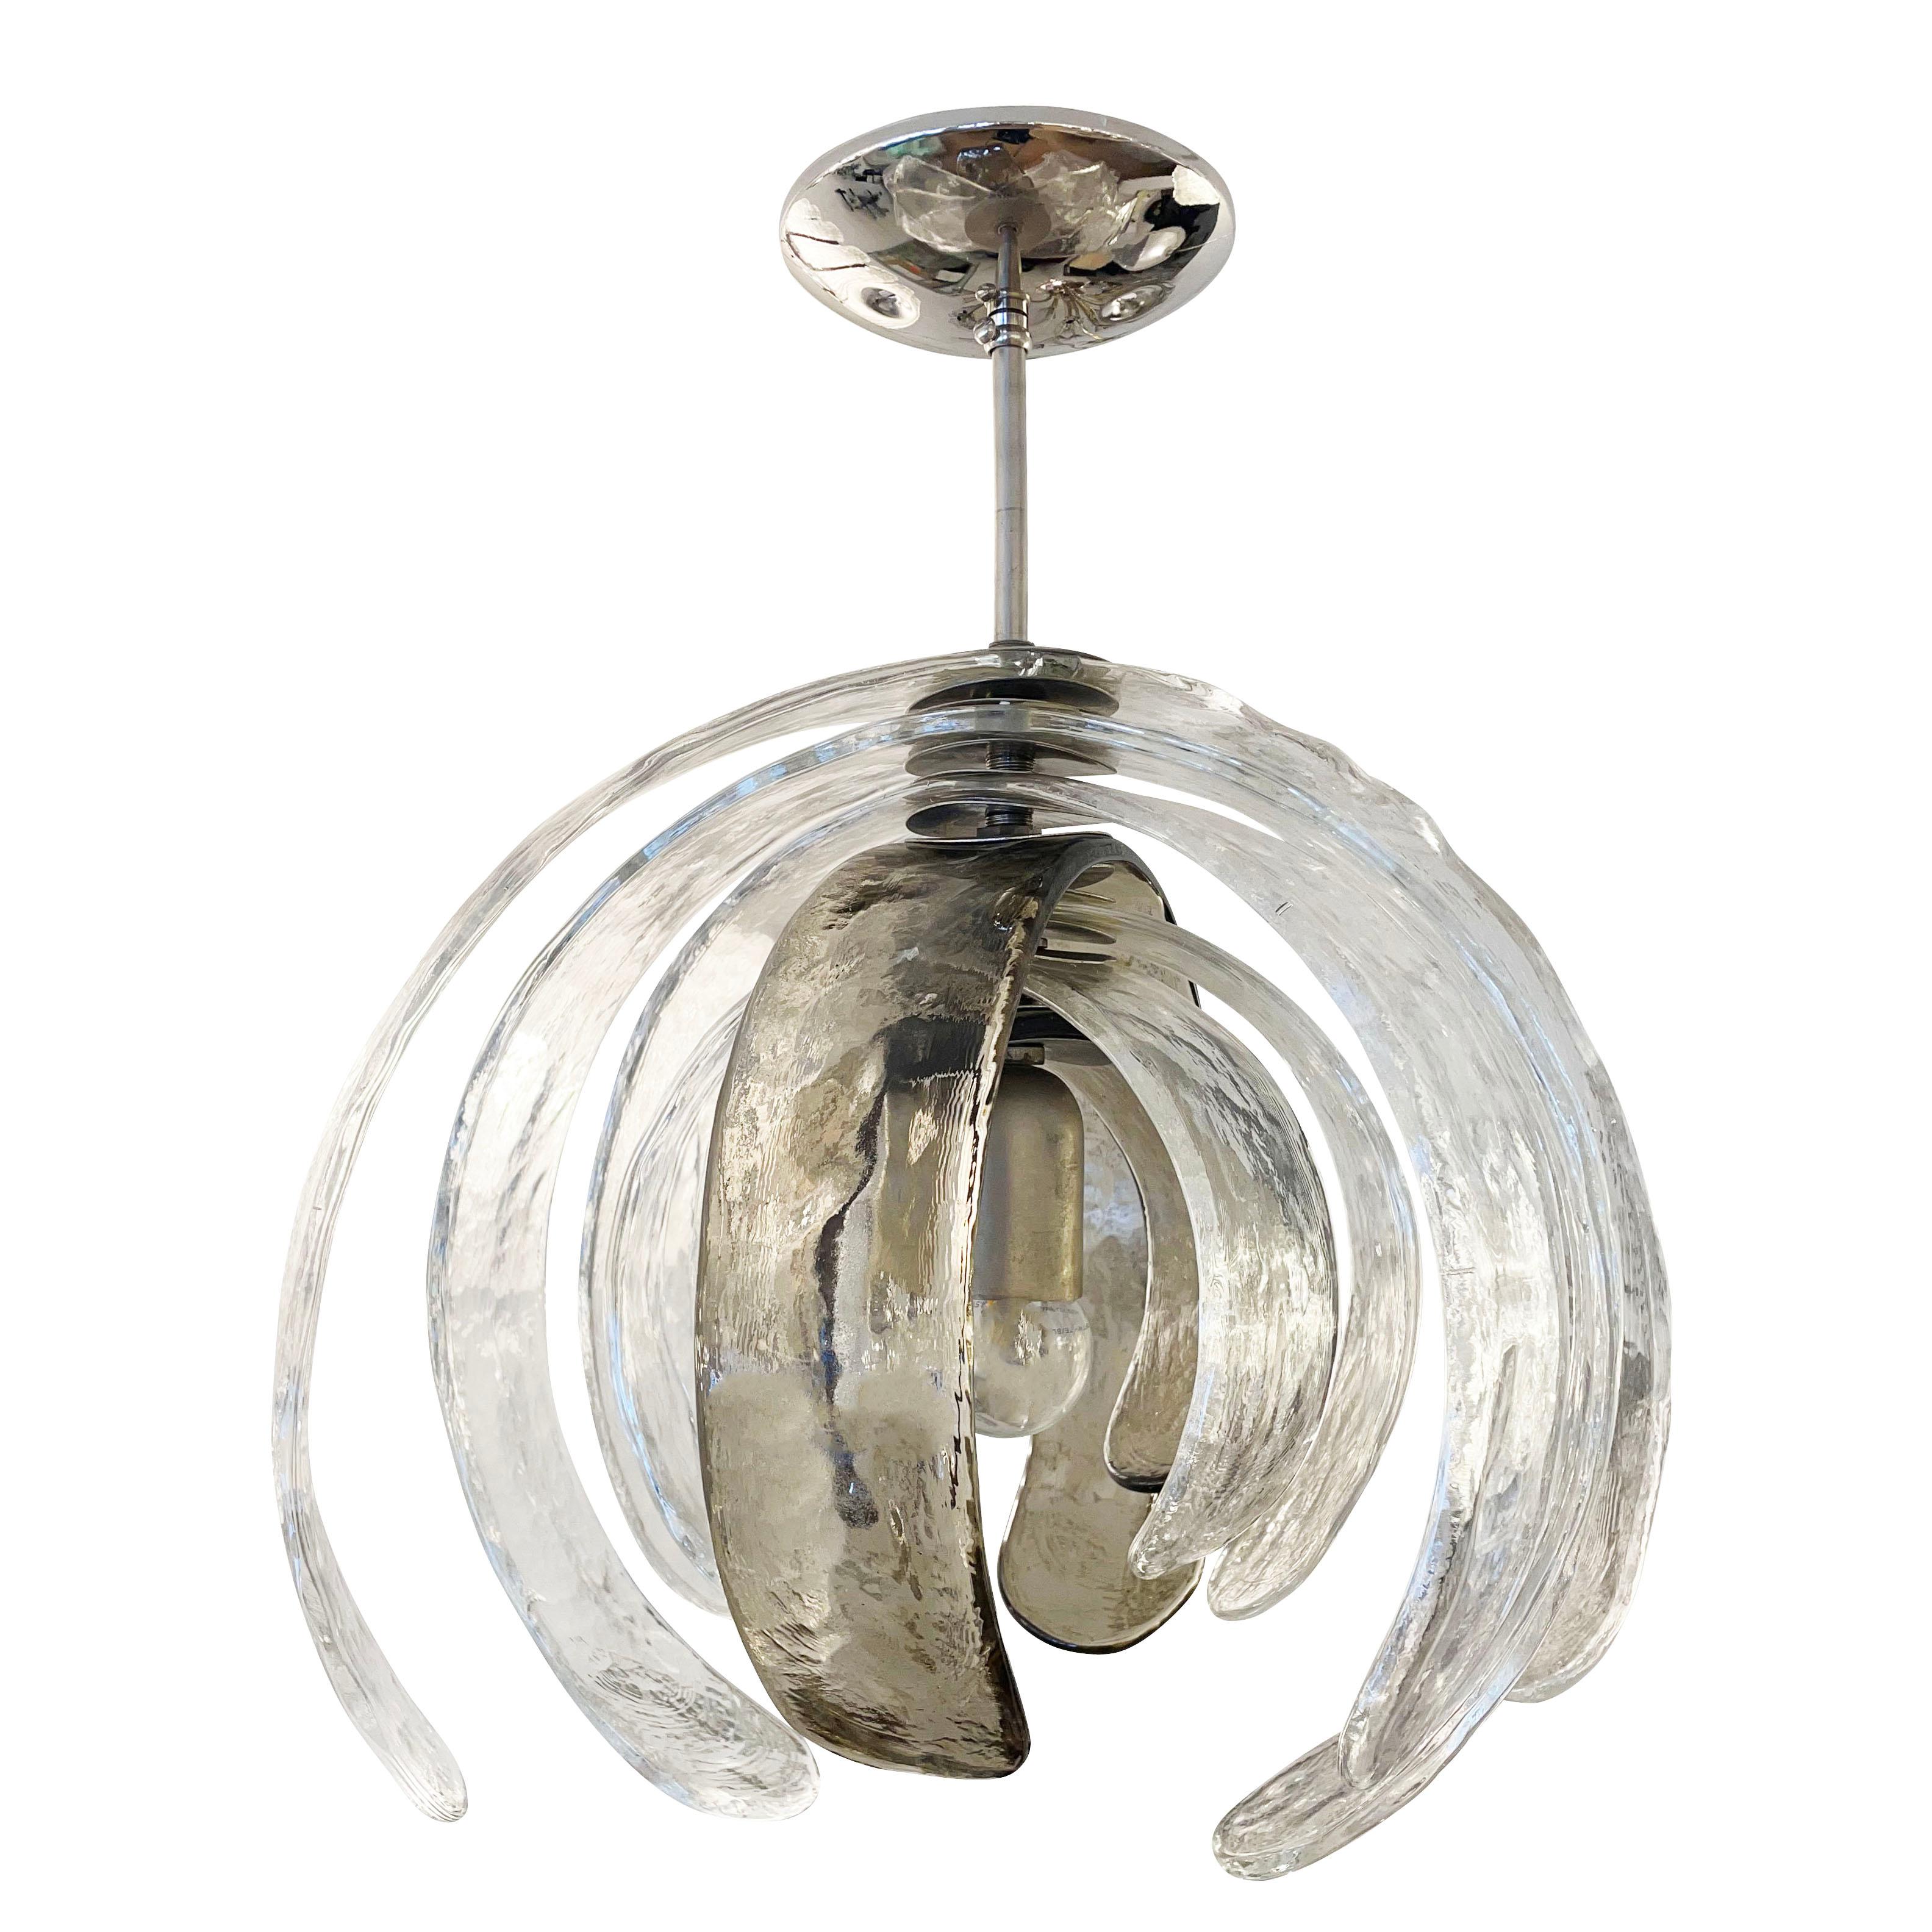 Sculptural Murano glass chandelier designed by Carlo Nason for Mazzega in the 1960s. It’s composed of several alternating clear and gray textured petal shaped glasses that can rotate around the center stem. Polished nickel hardware. Holds one